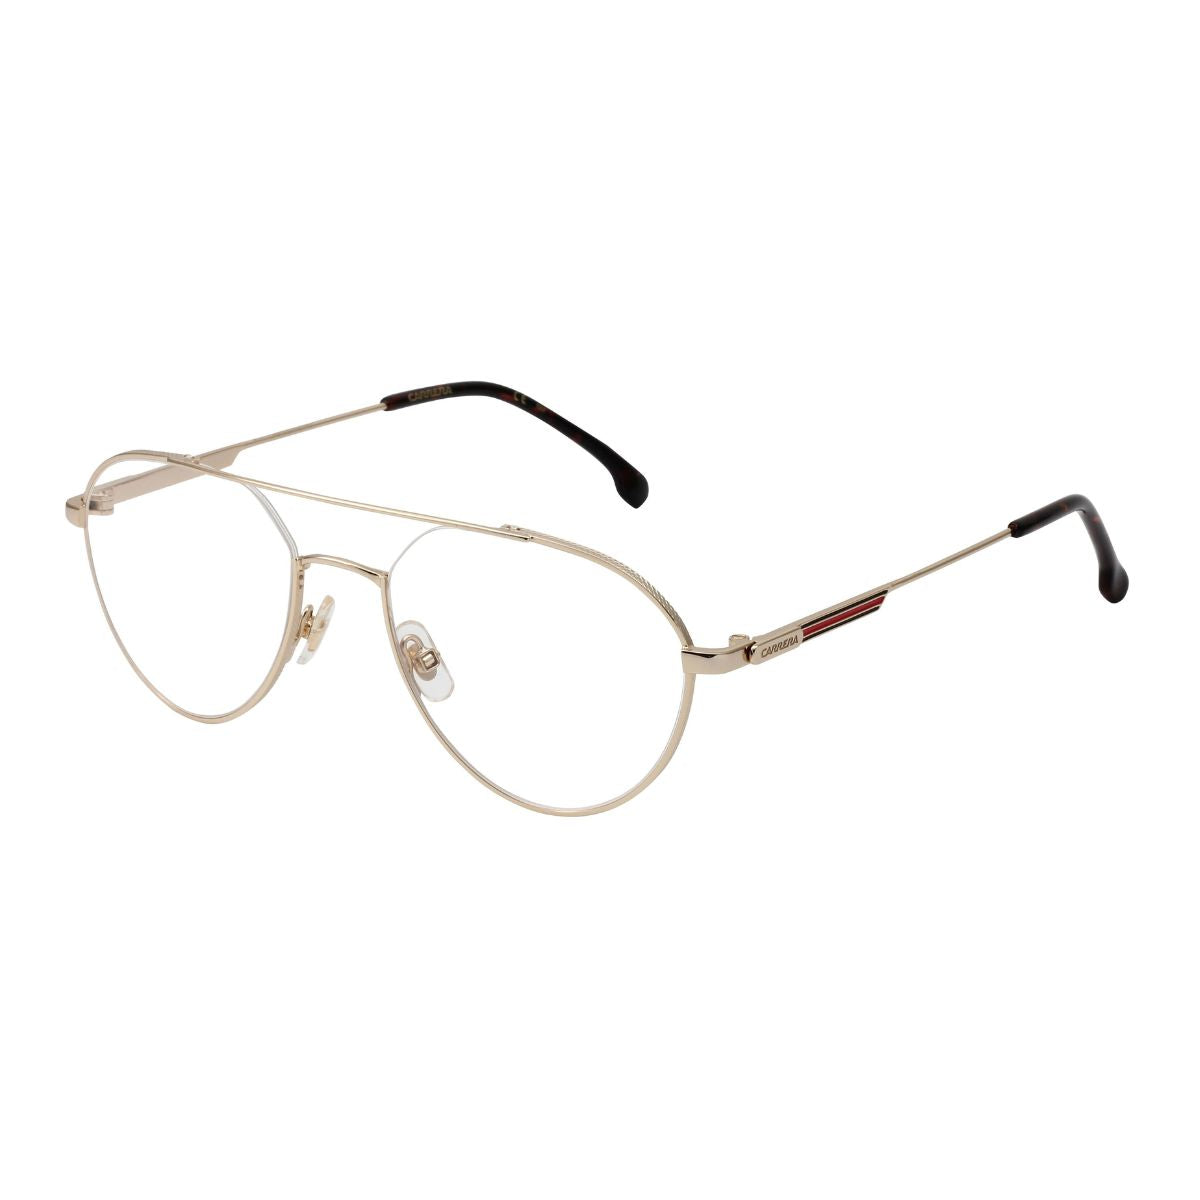 "Carrera 1110 J5G spectacle frame for men and women at optorium"